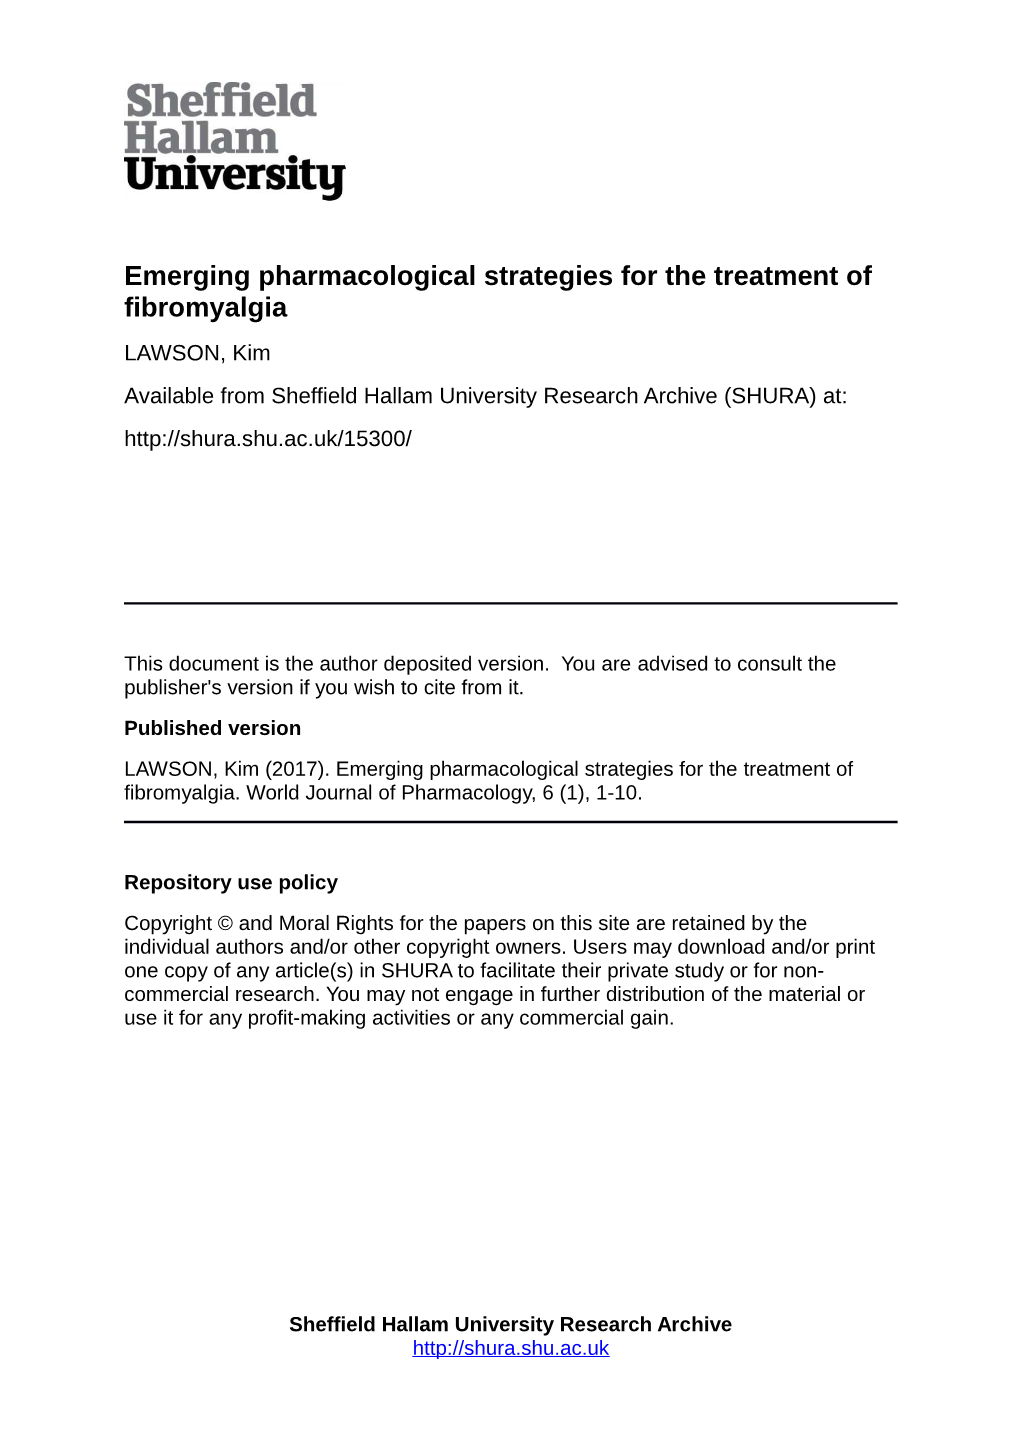 Emerging Pharmacological Strategies for the Treatment